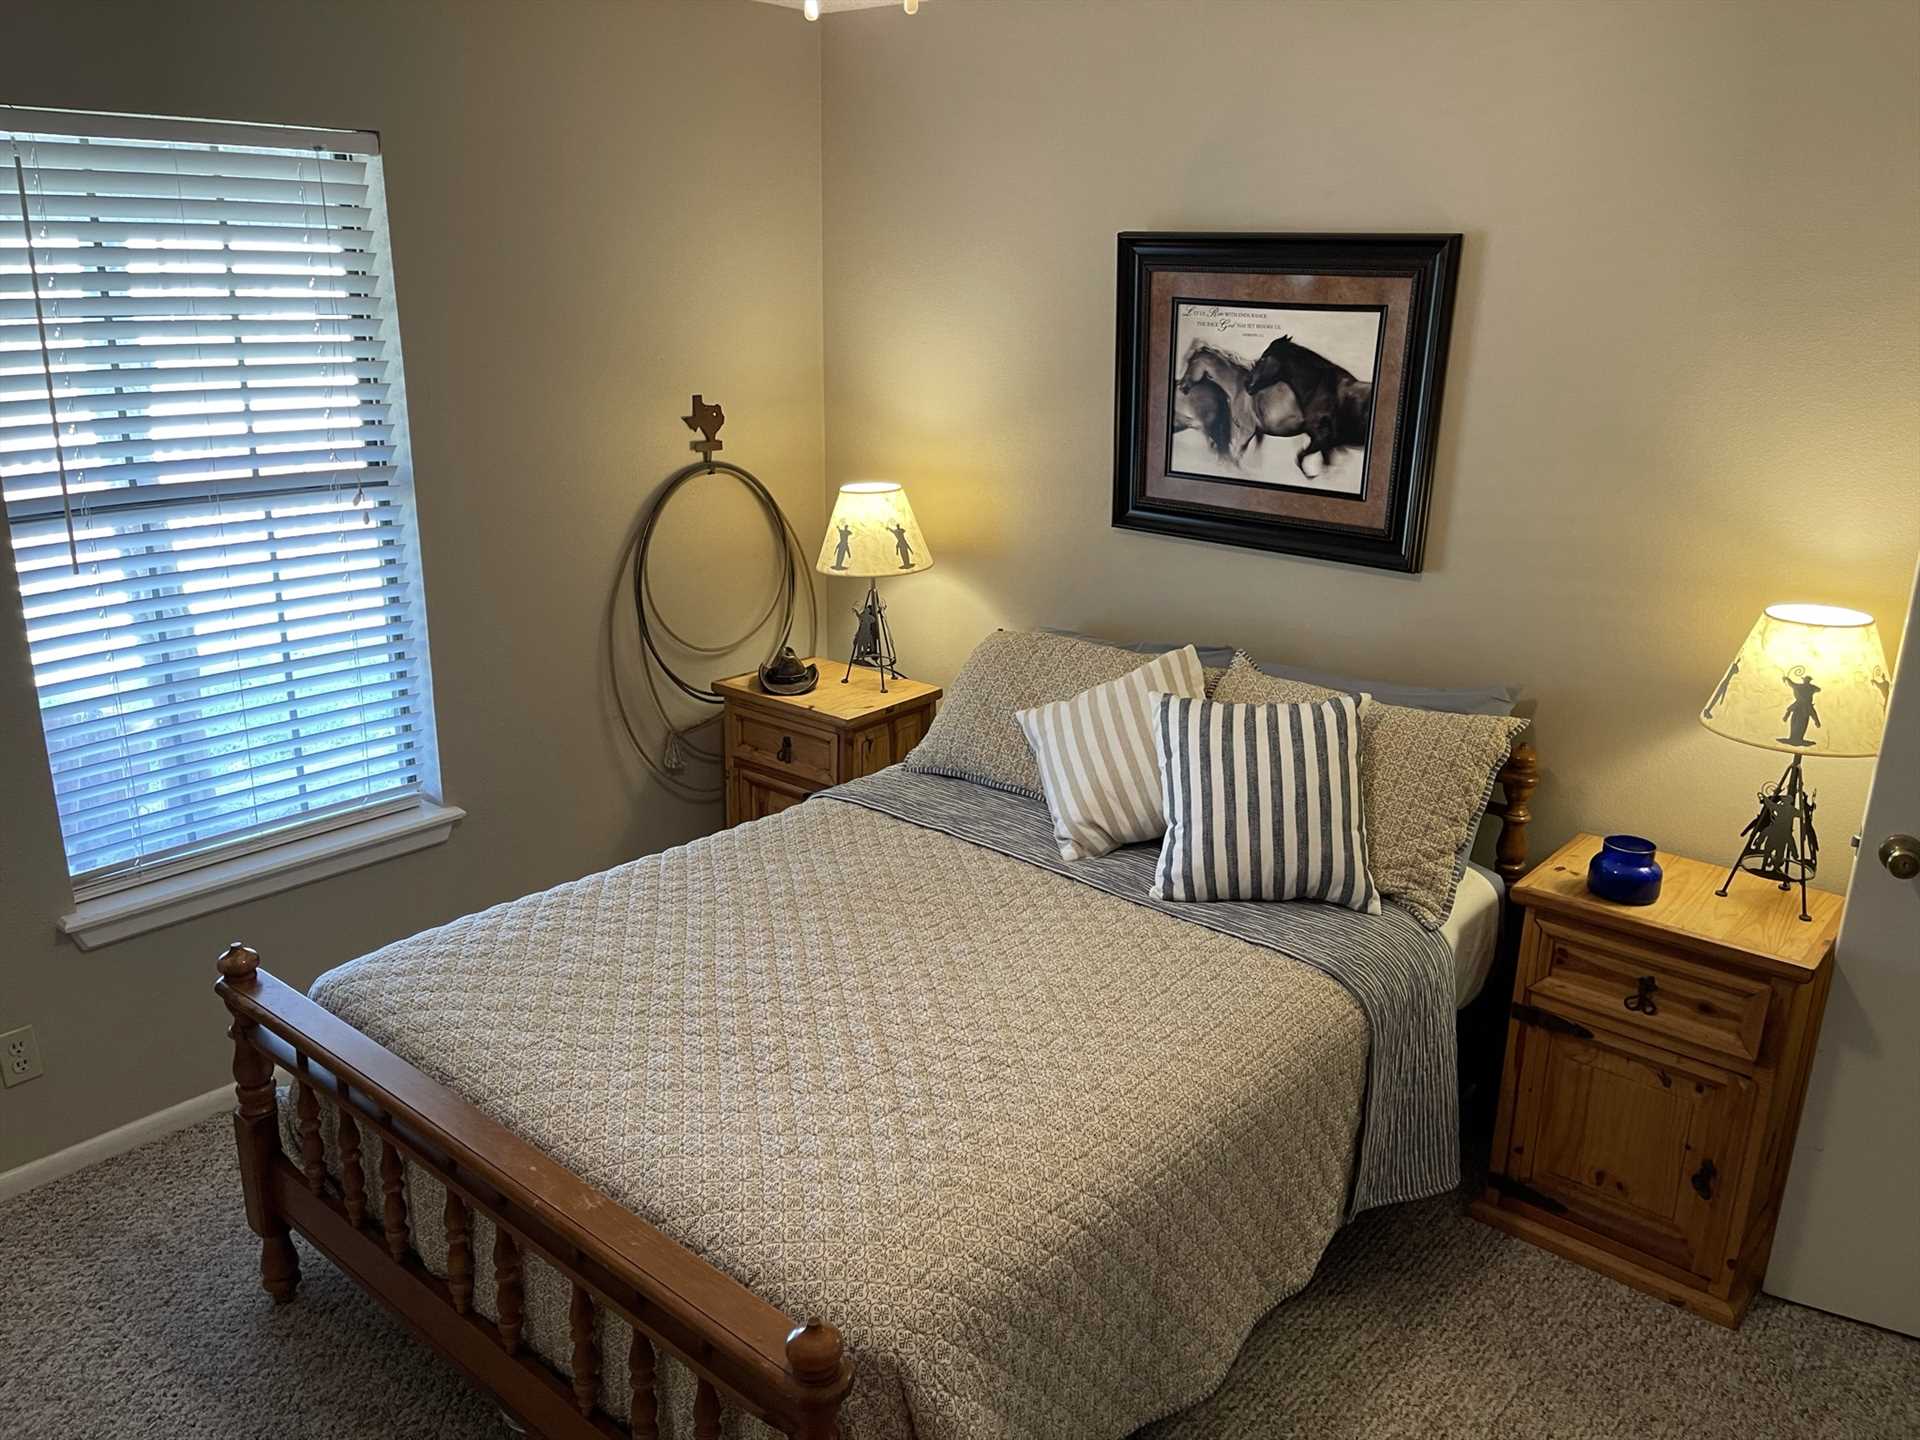                                                 A super-comfy double bed in the second bedroom invites peaceful slumber for two. All the beds in the Ranch House come with fluffy, clean linens.